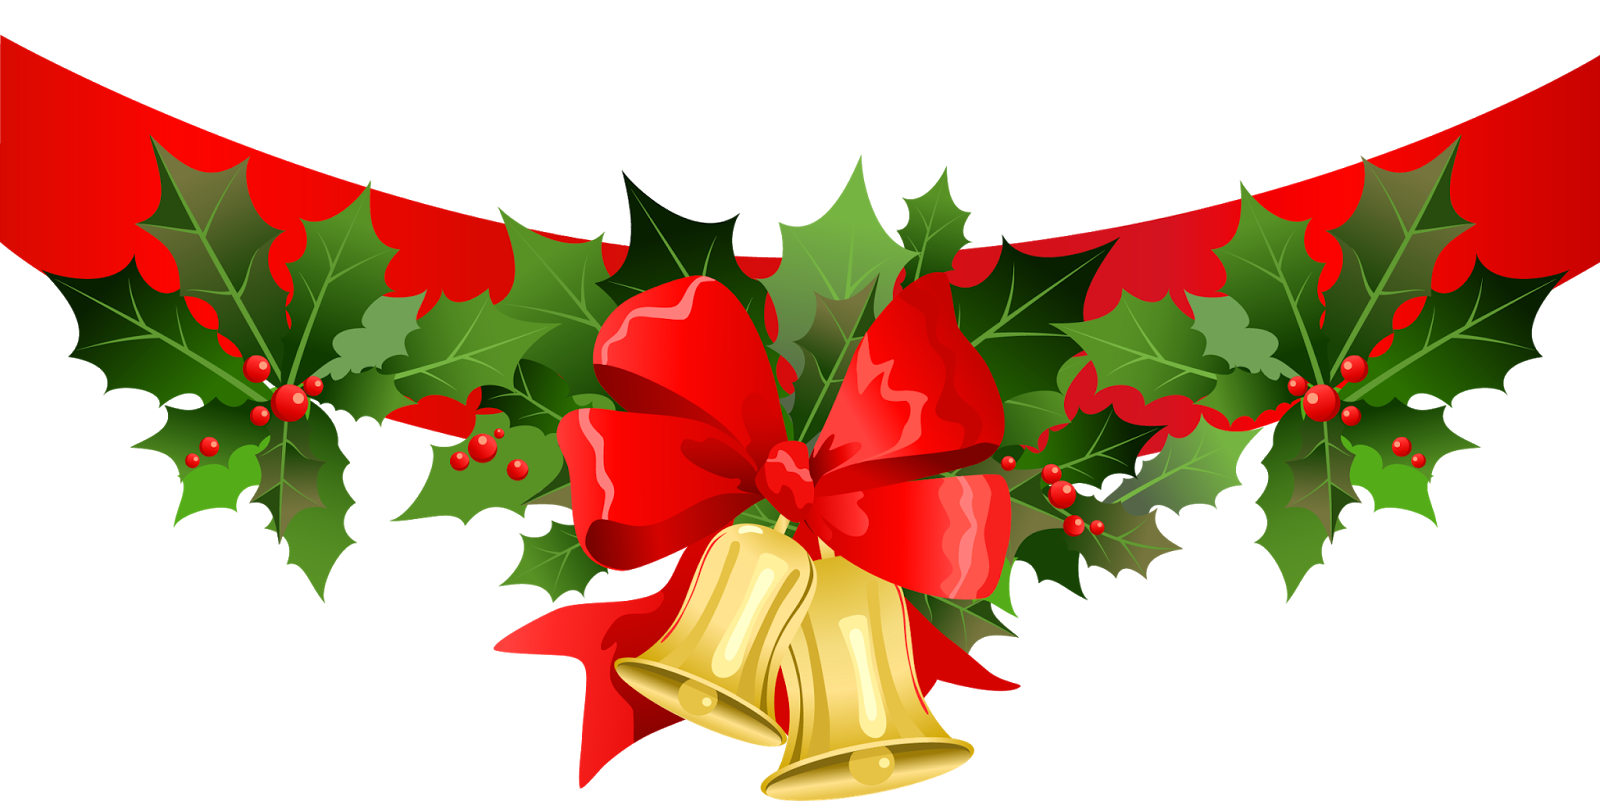 Forgetmenot christmas bells. Poinsettia clipart holly